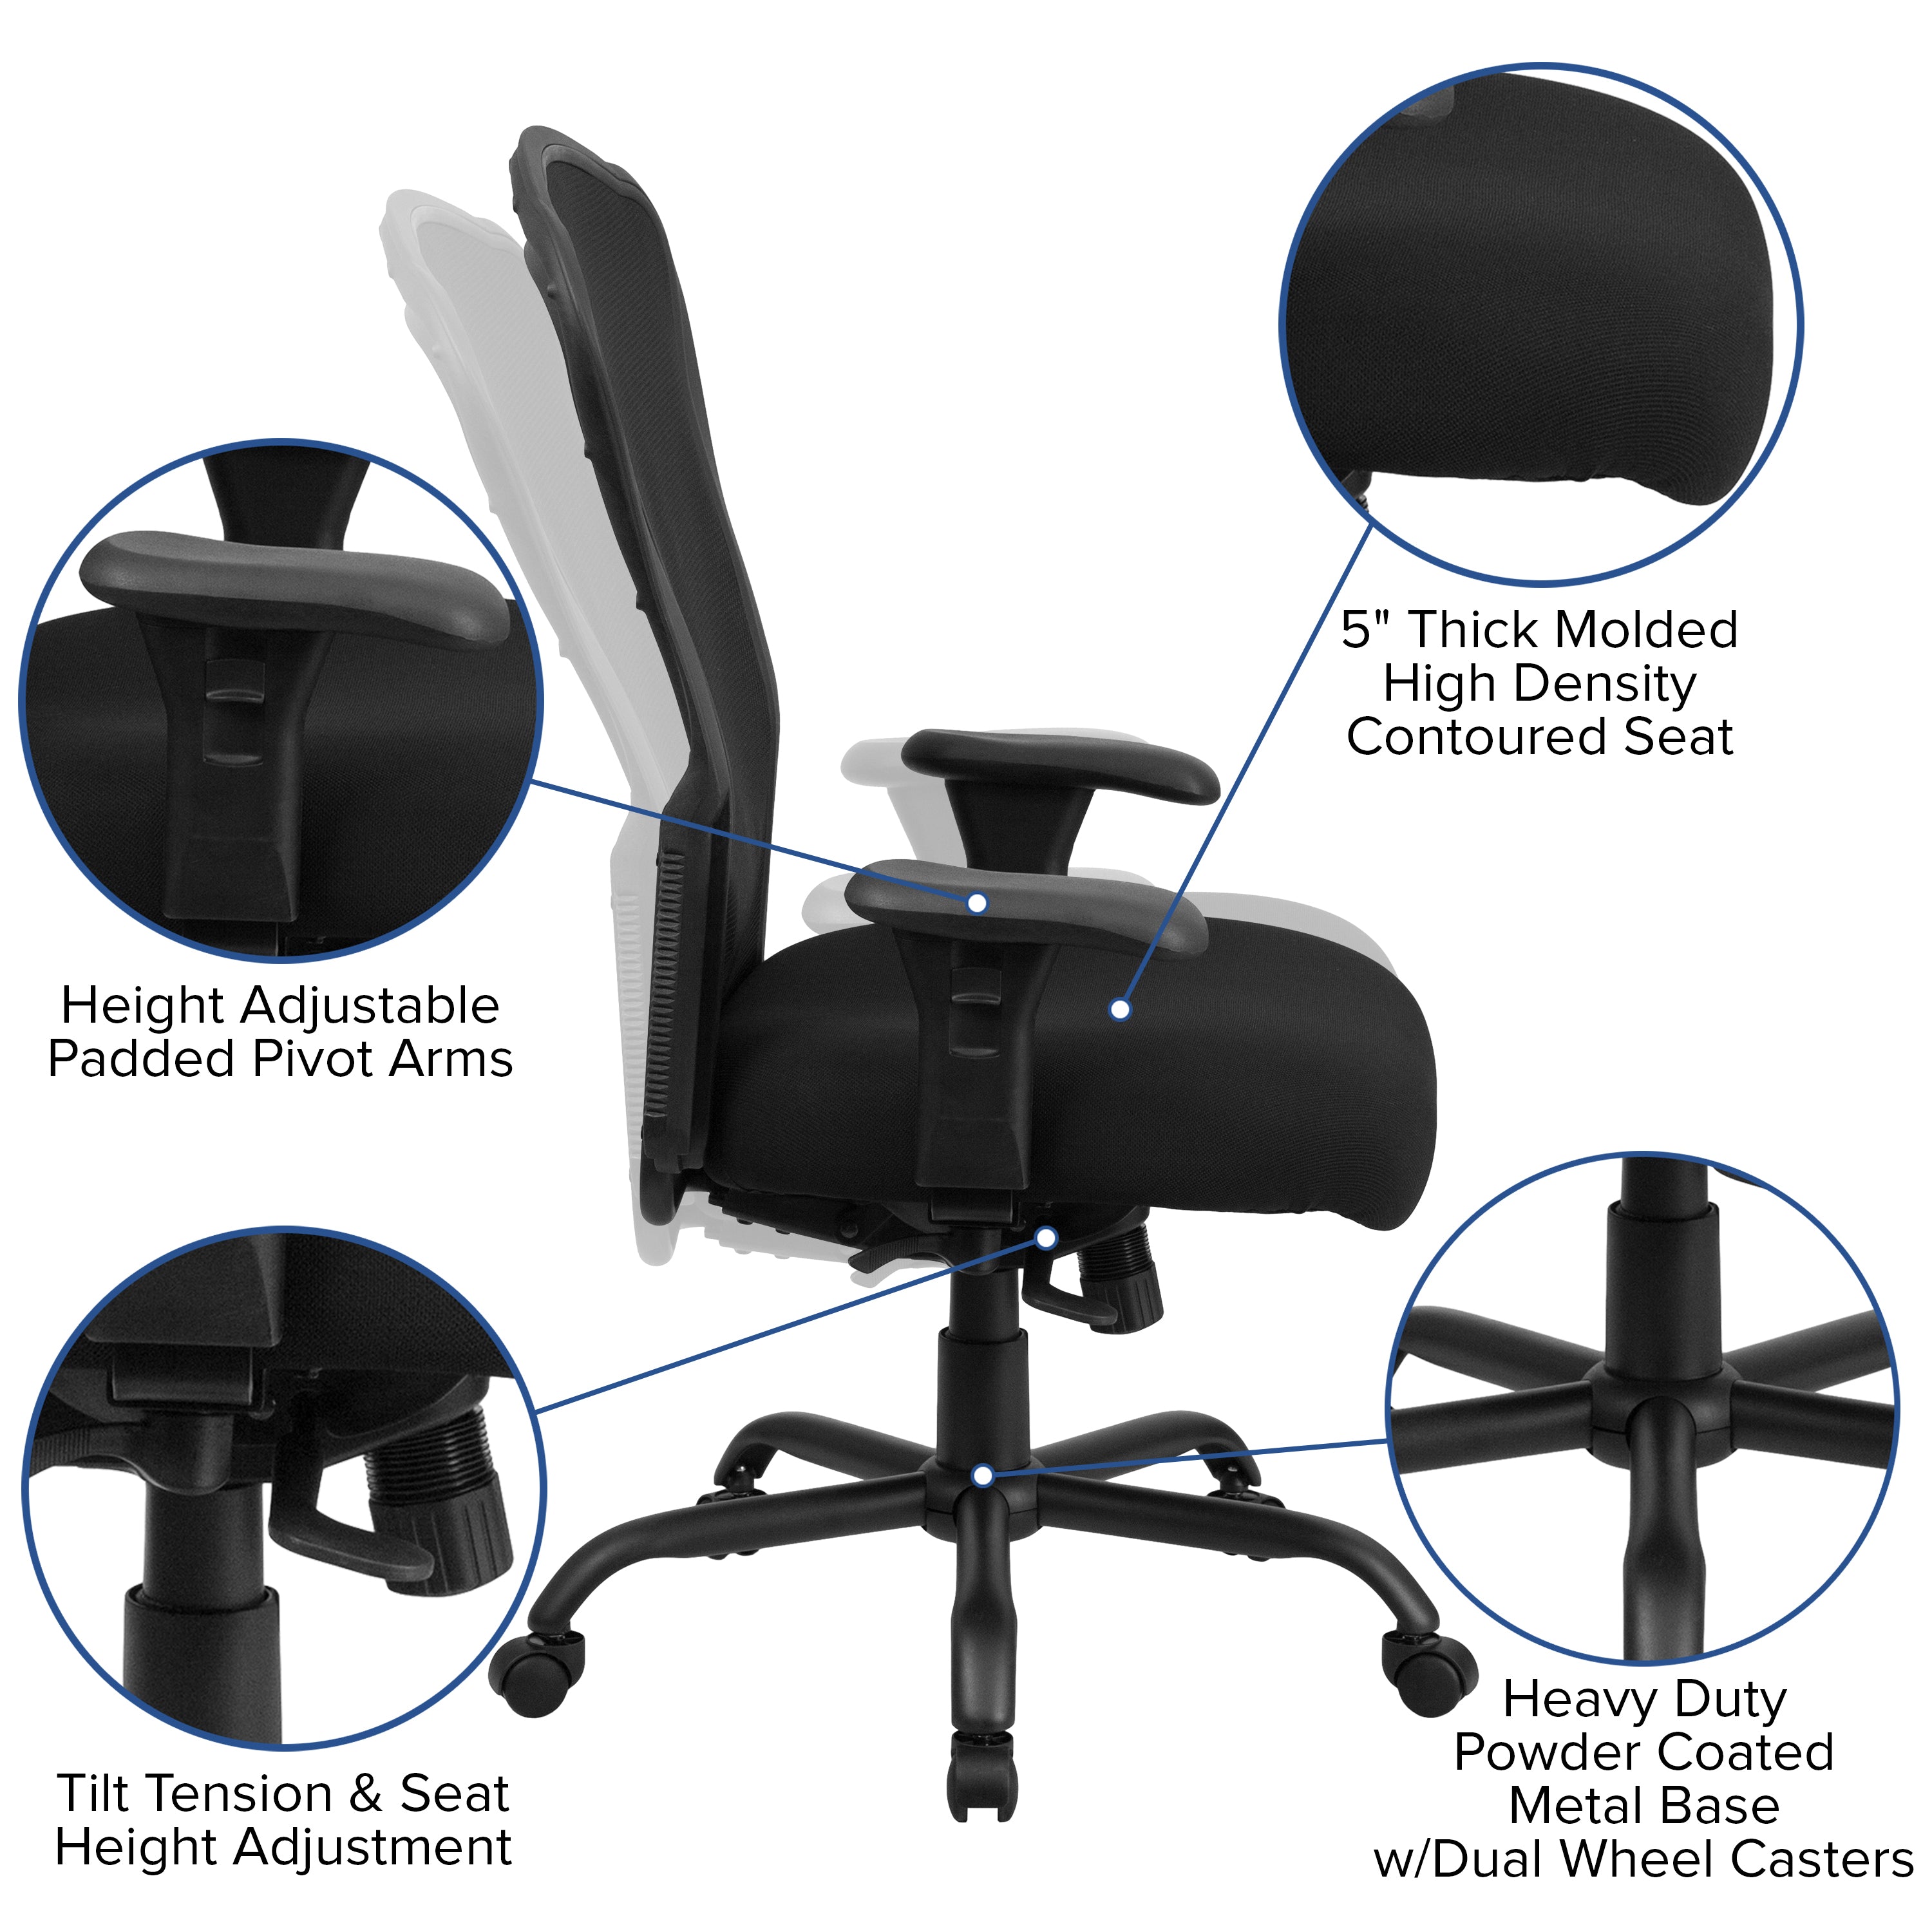 HERCULES Series 24/7 Intensive Use Big & Tall 400 lb. Rated Mesh Multifunction Swivel Ergonomic Office Chair with Synchro-Tilt-Big & Tall Office Chair-Flash Furniture-Wall2Wall Furnishings